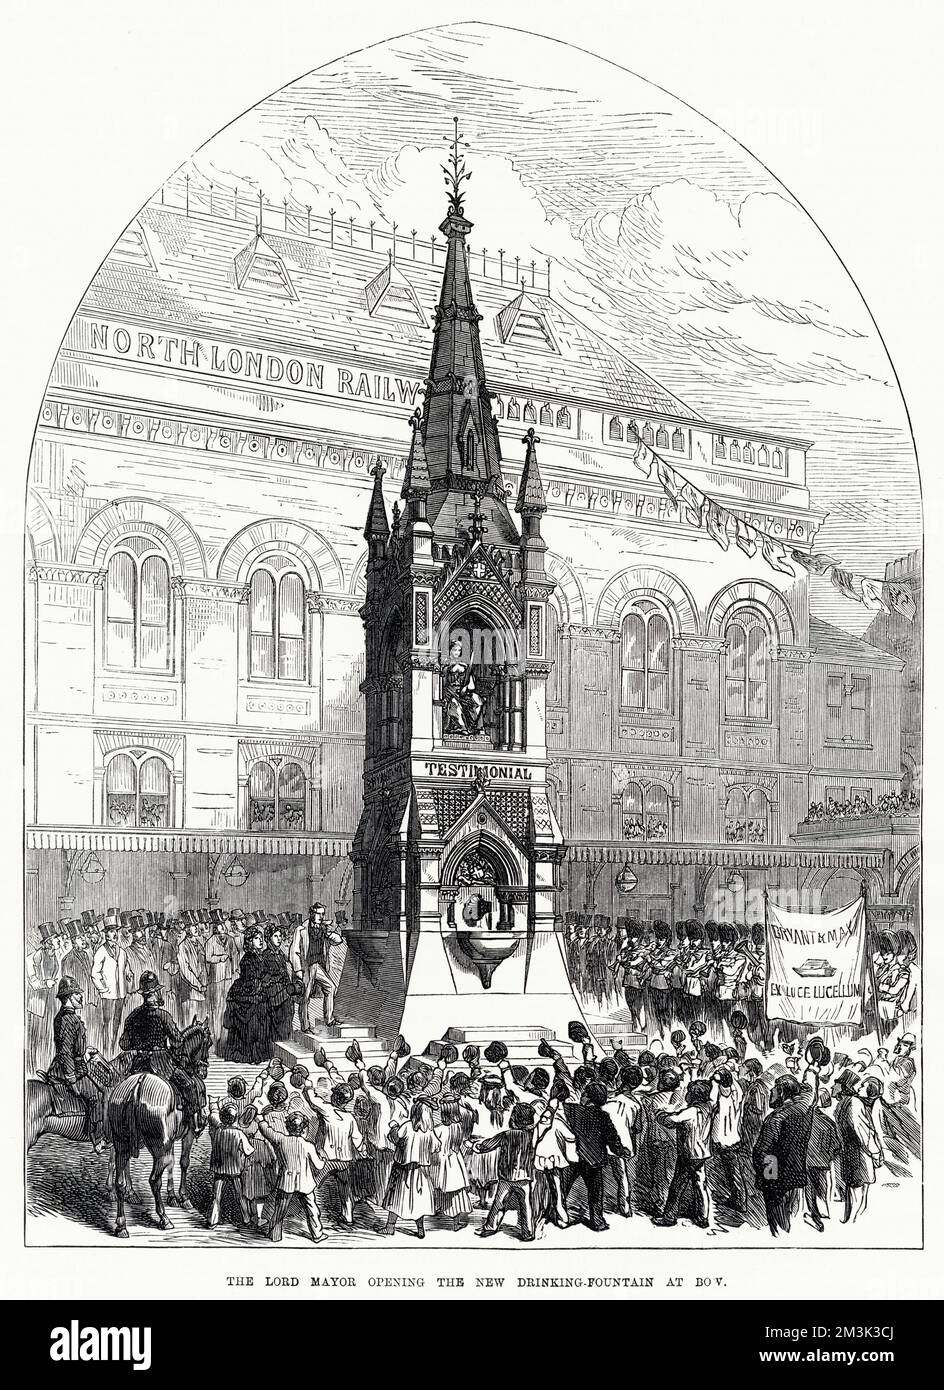 Opening of a drinking fountain outside Bow Station by the Lord Mayor of London.  This monumental fountain was dedicated to Messrs. Bryant and May, manufacturers of 'Patent Safety Lucifer Matches'. Stock Photo